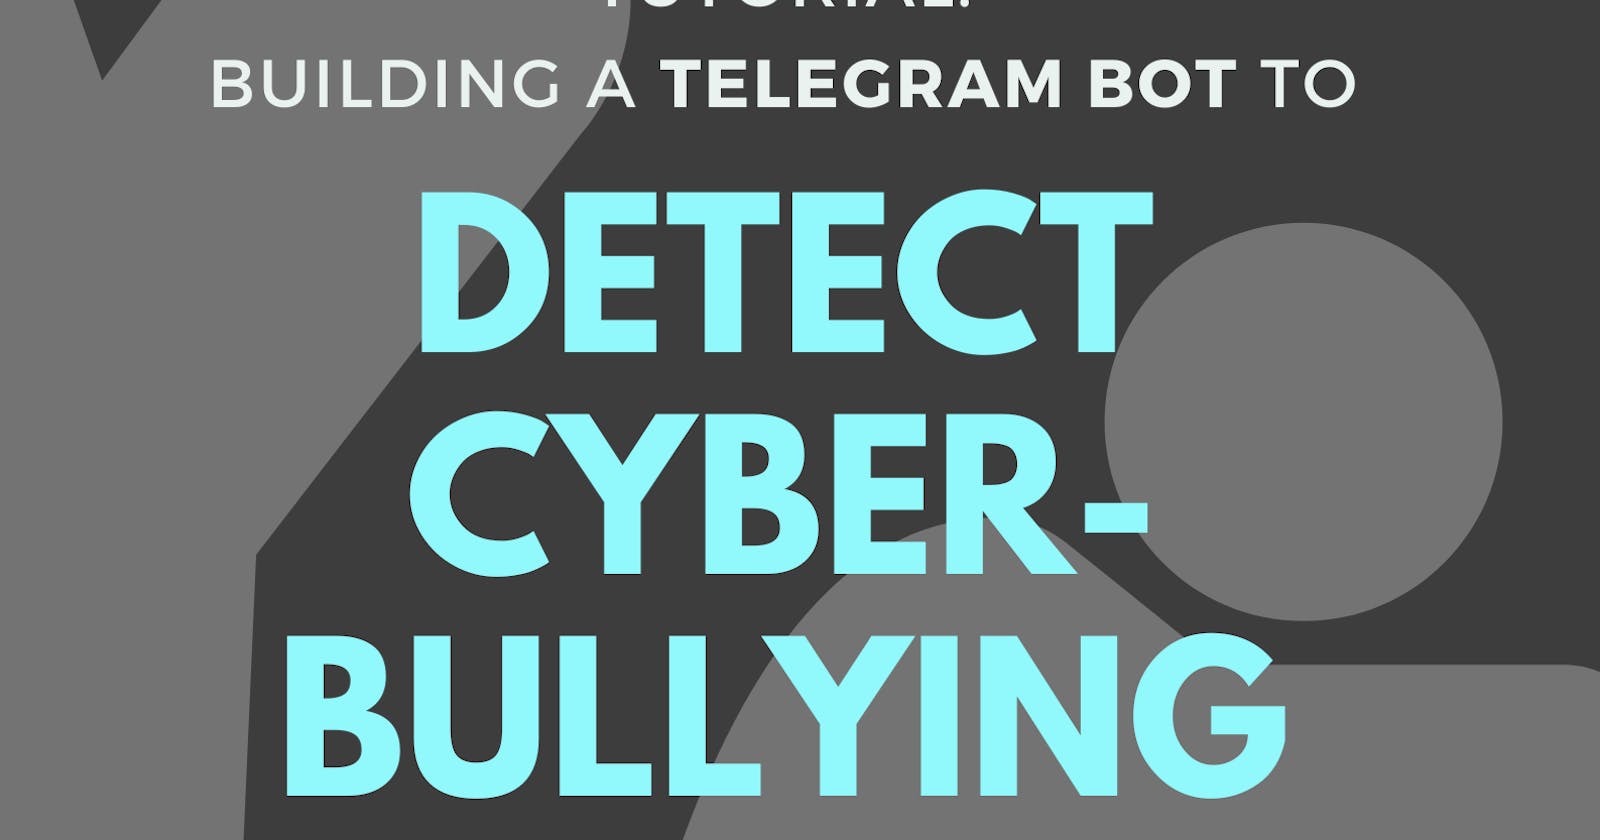 Building a Telegram Bot to Detect Cyberbullying: A Python Machine Learning Tutorial